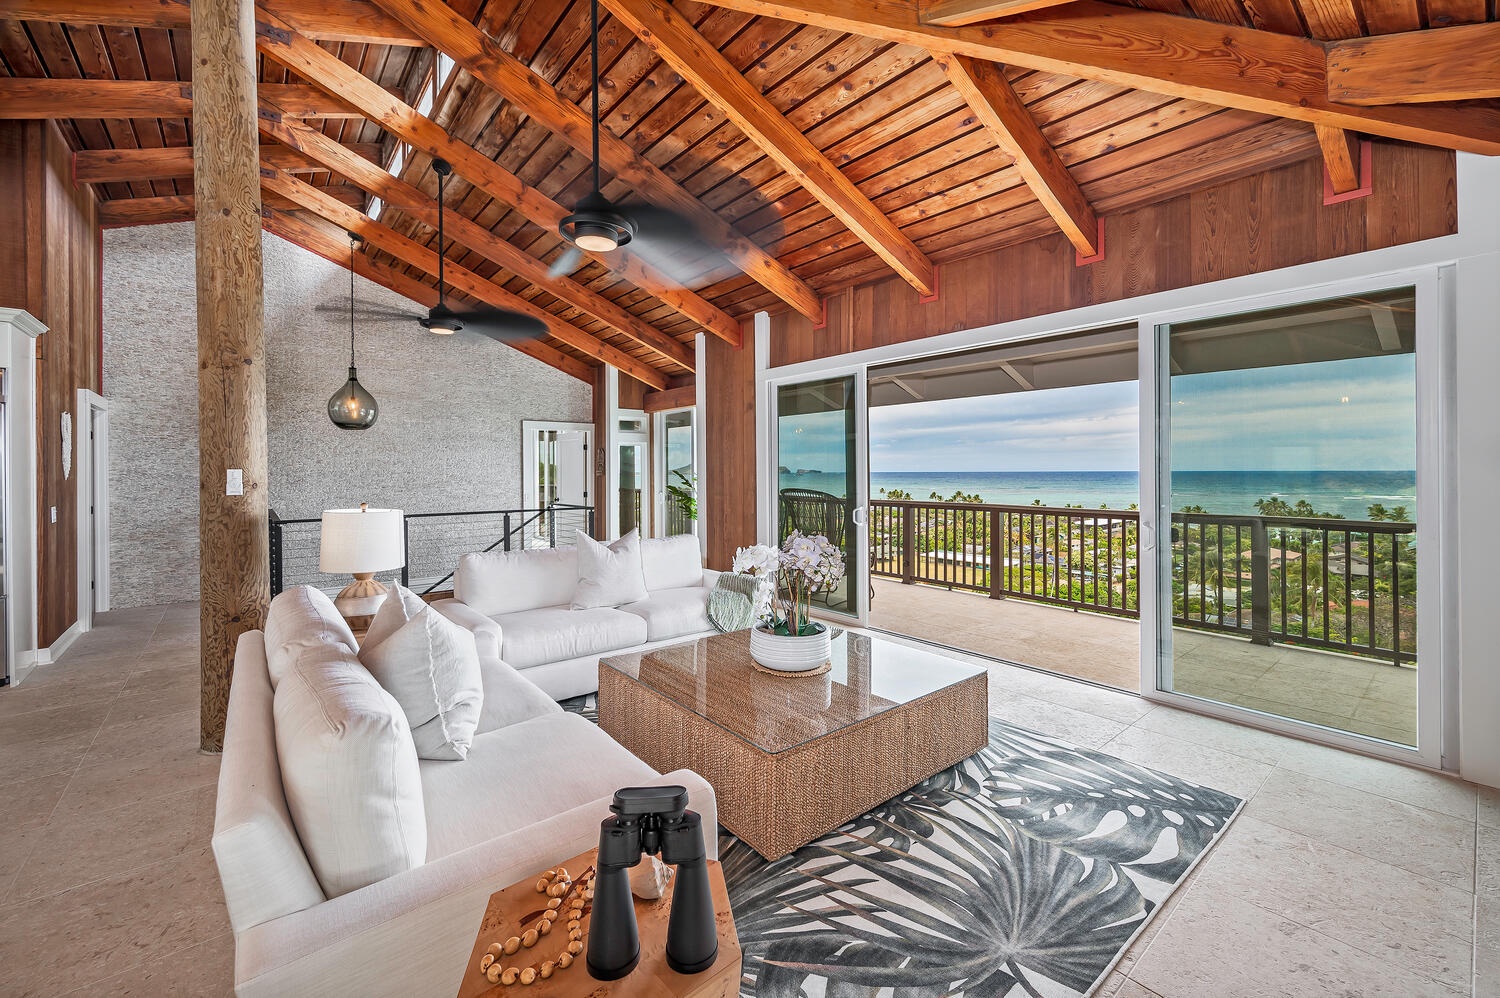 Kailua Vacation Rentals, Hale Lani - Take in the expansive ocean views from the comfort of your living room